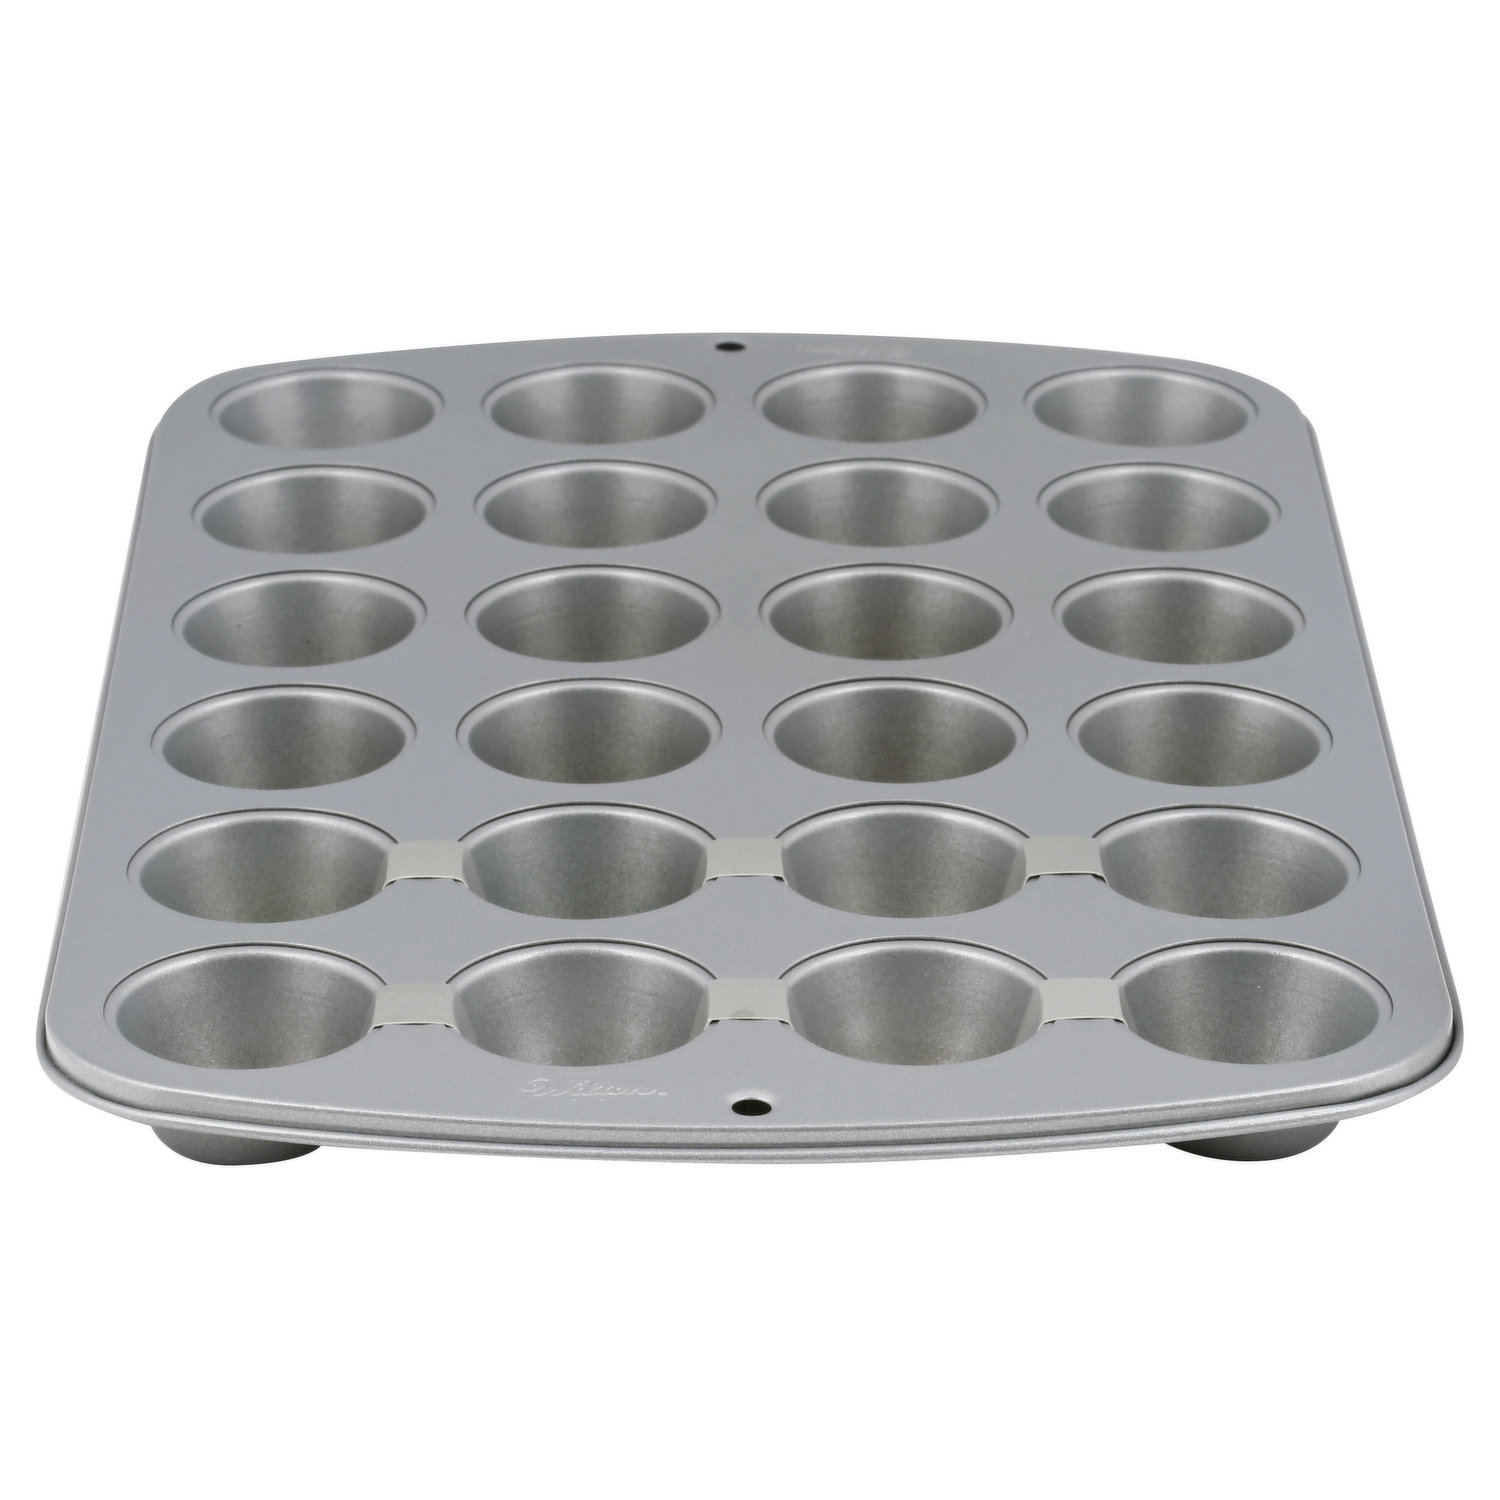 Wilton Bake It Simply Extra Large Non-Stick Mini Muffin Pan, 24-Cup, Pan  Size 9.9 x 14.7 in.